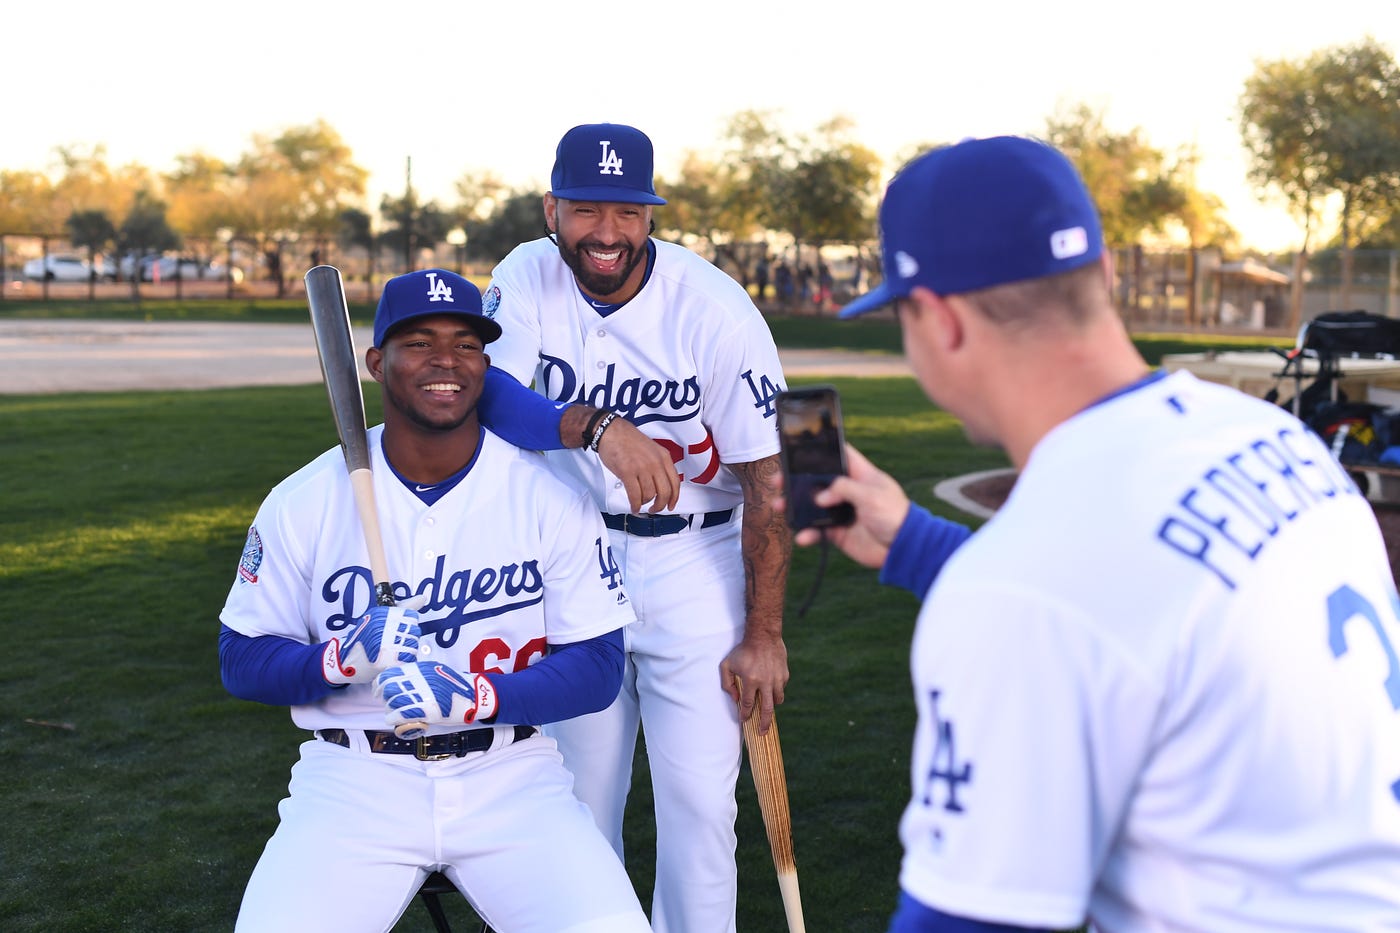 Kemp and Puig made their marks in Dodger history with production and flair  | by Cary Osborne | Dodger Insider